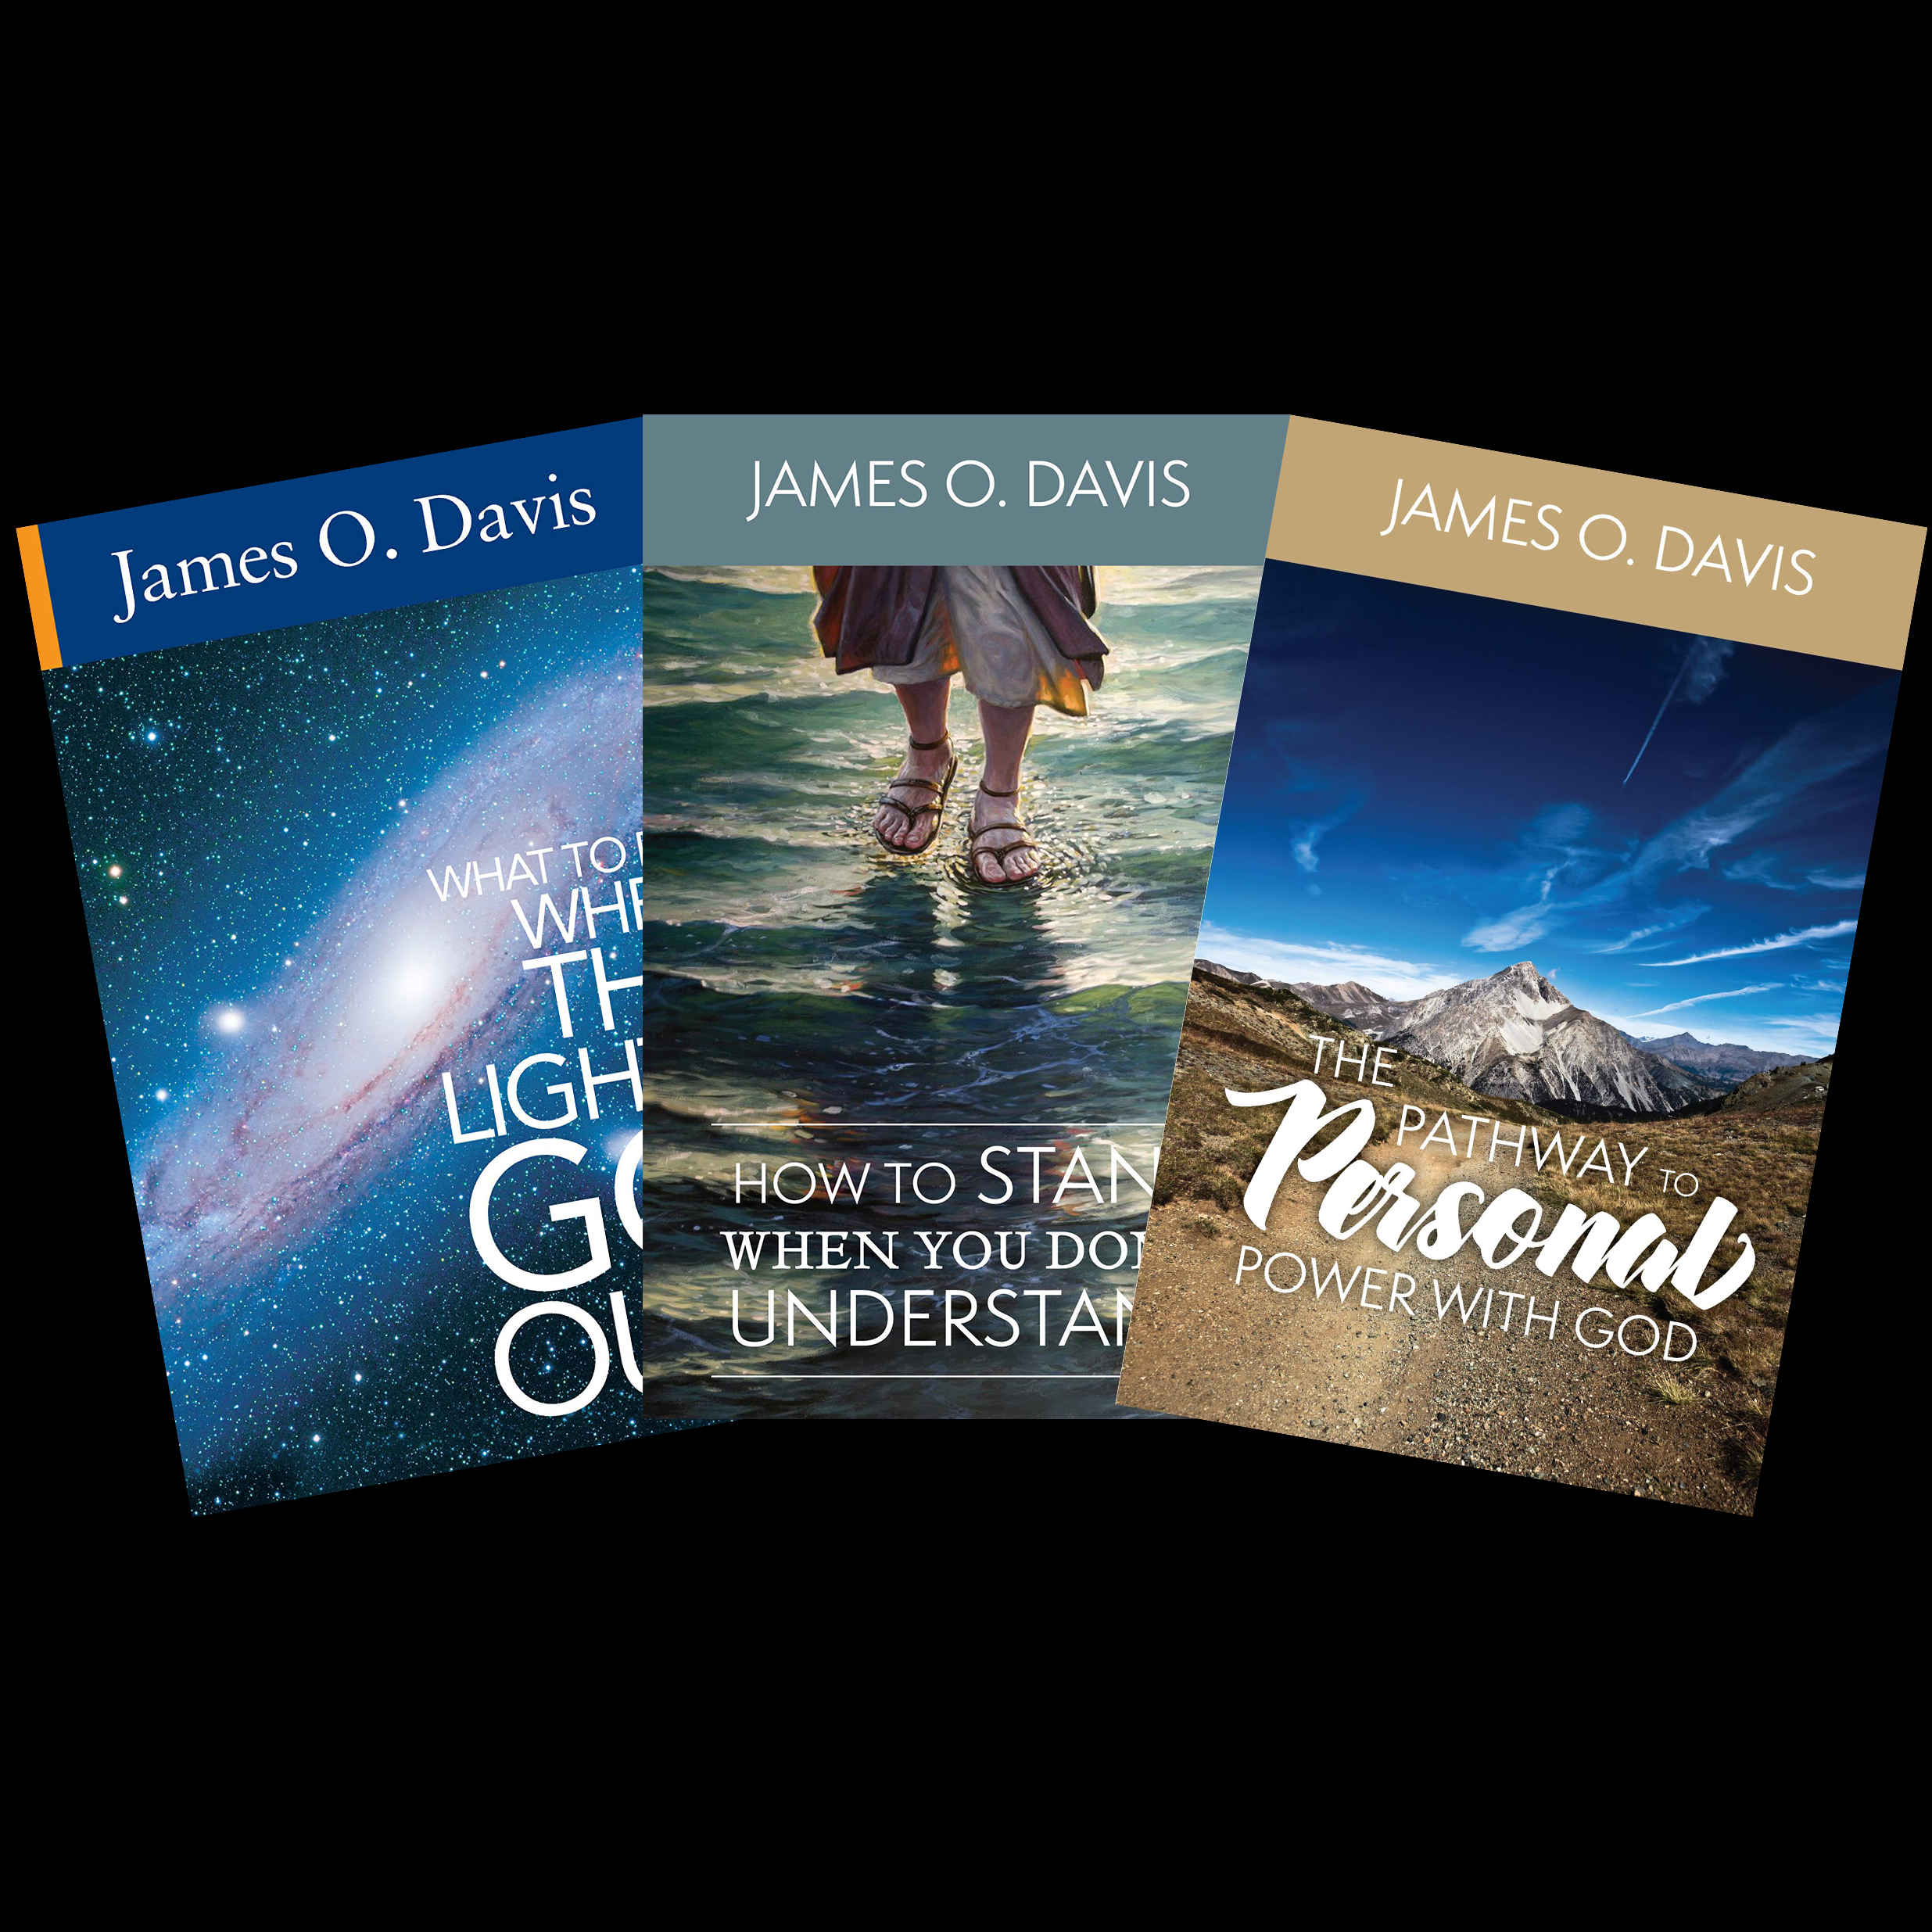 https://jamesodavis.com/wp-content/uploads/Lights-Go-Out-How-to-Stand-Personal-Power-with-God-Bundle.png